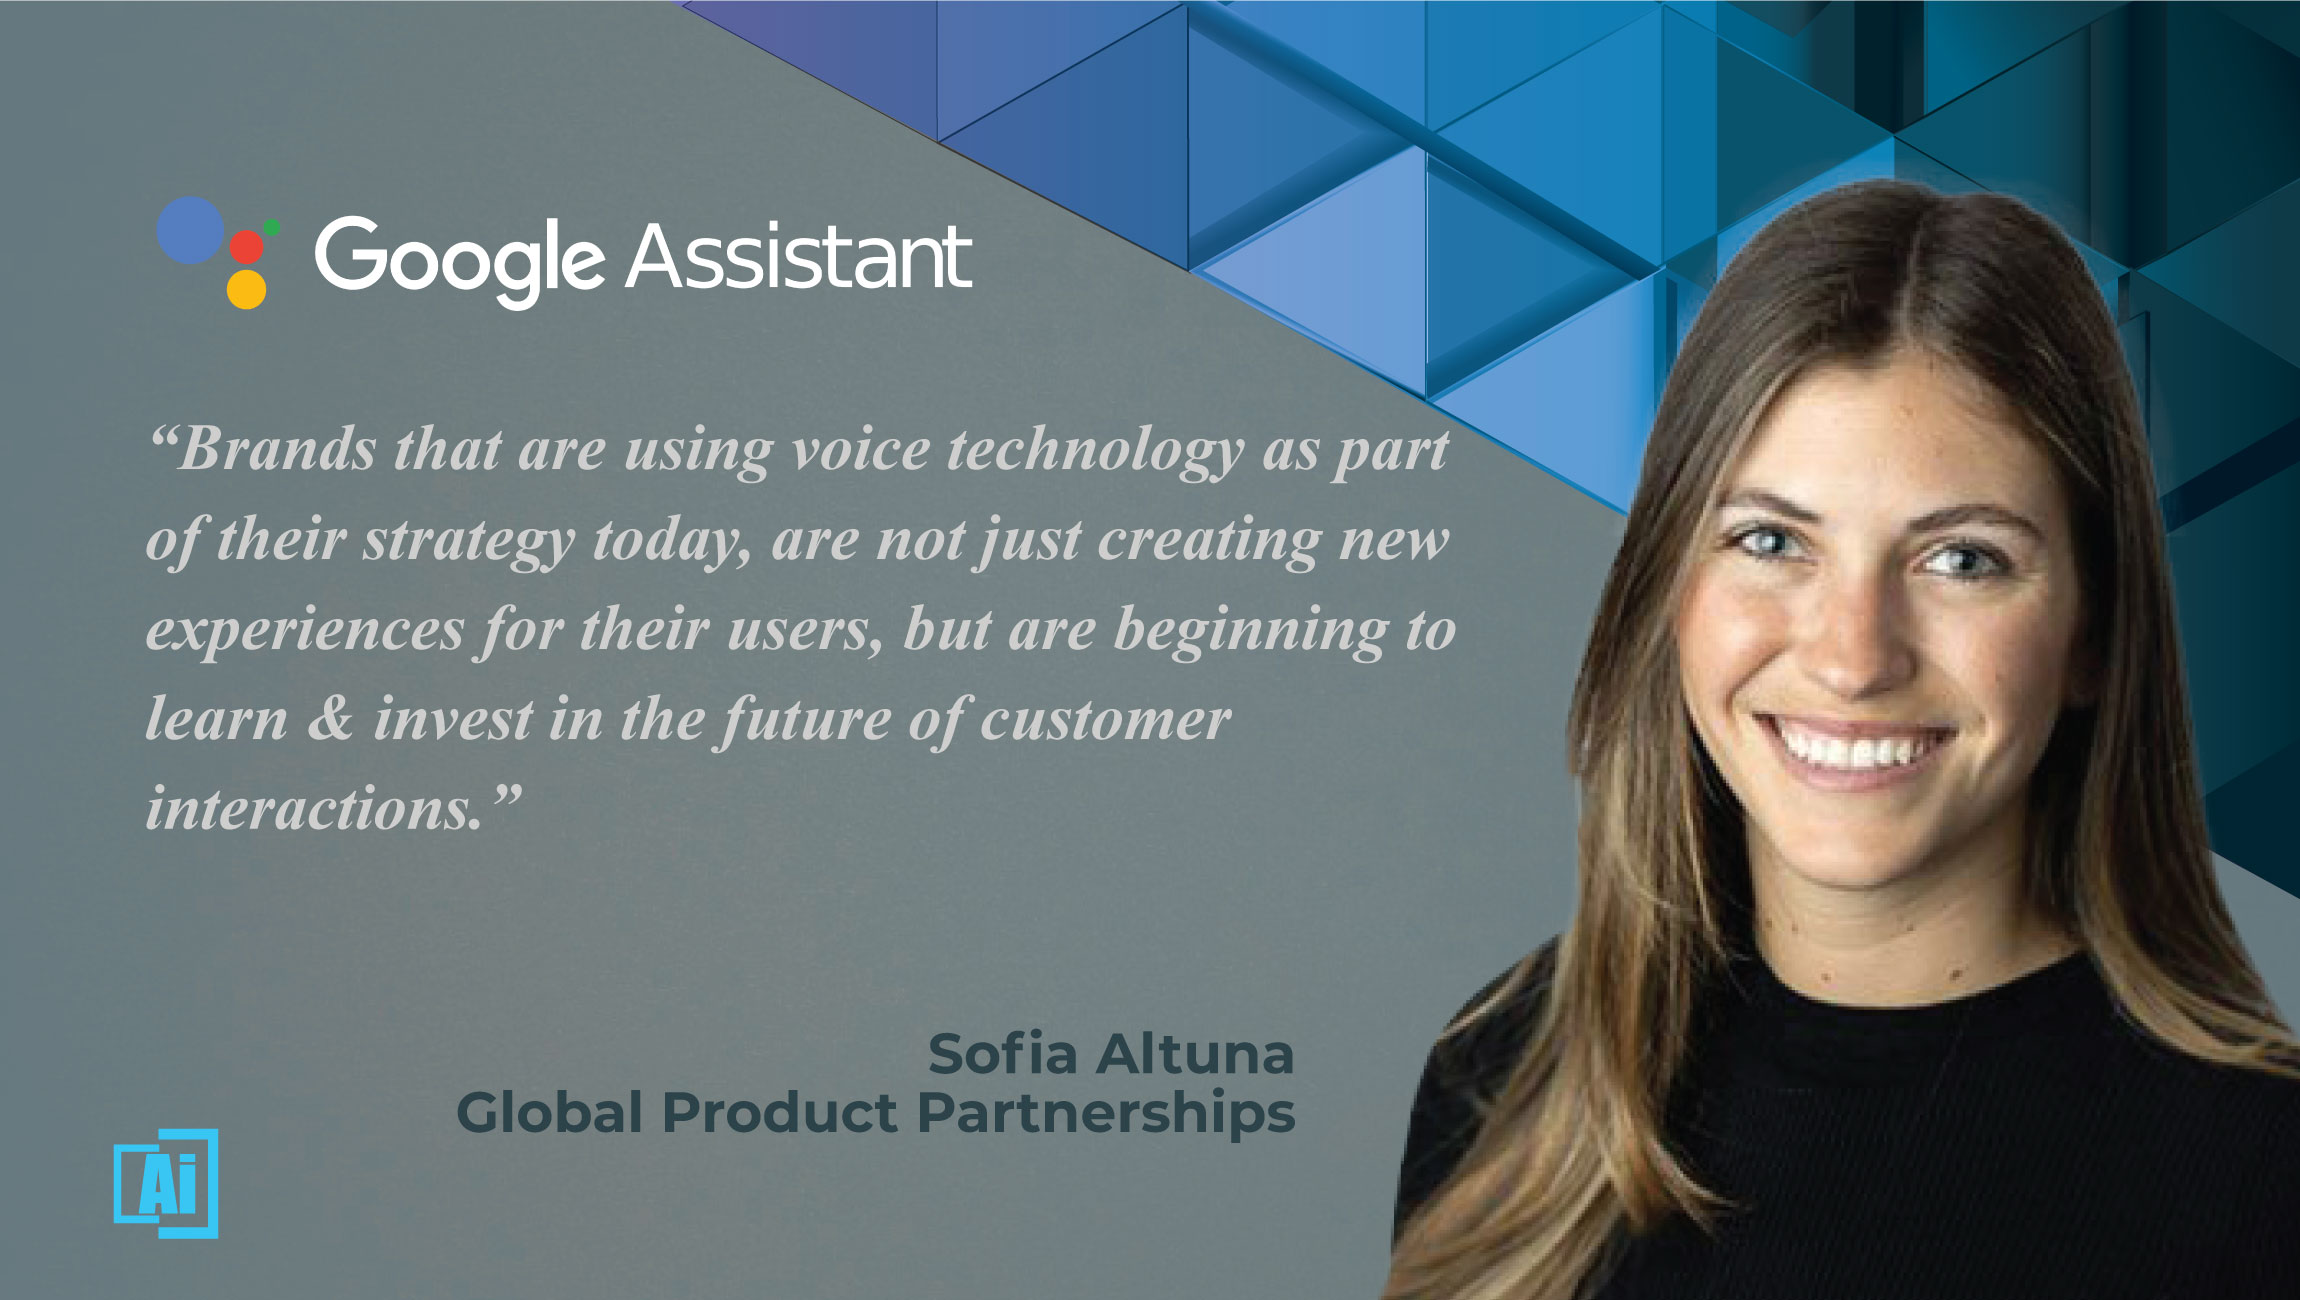 AiThority Interview with Sofia Altuna, Global Product Partnerships at Google Assistant